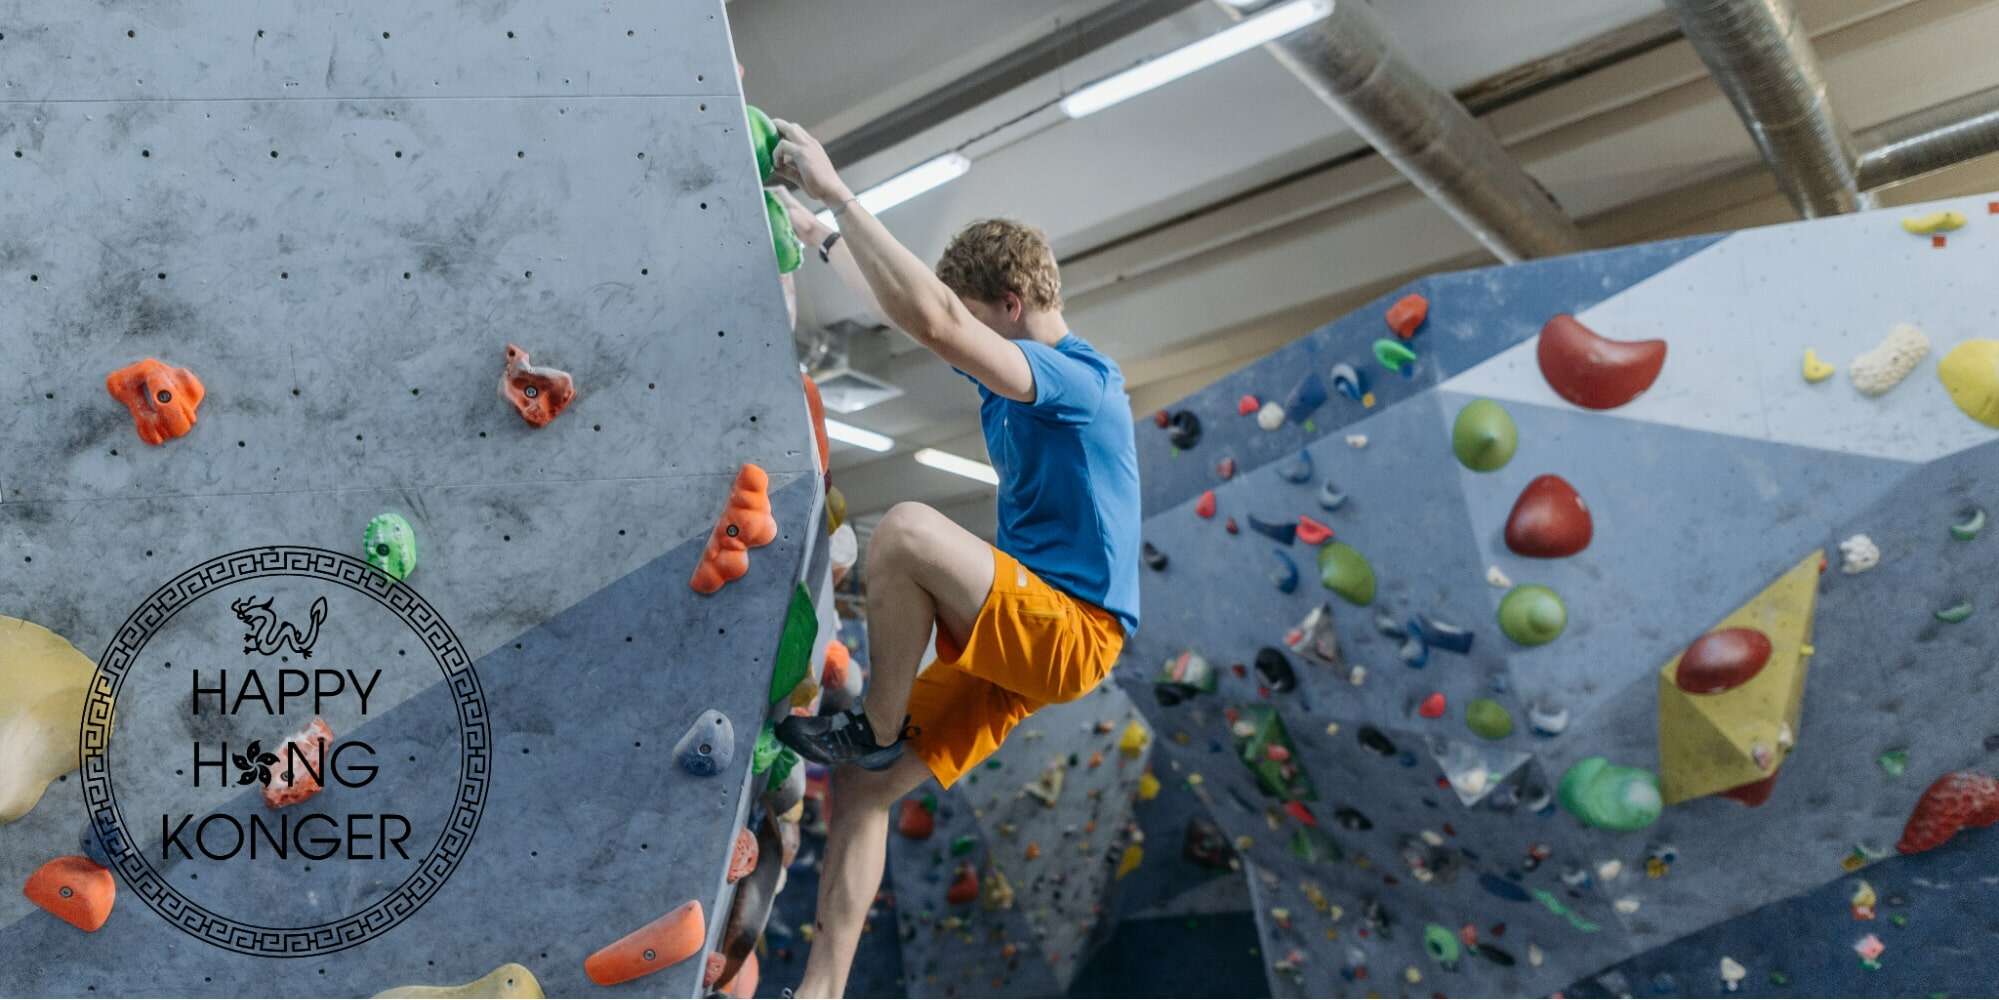 Top 5 Places For Rock Climbing In Hong Kong